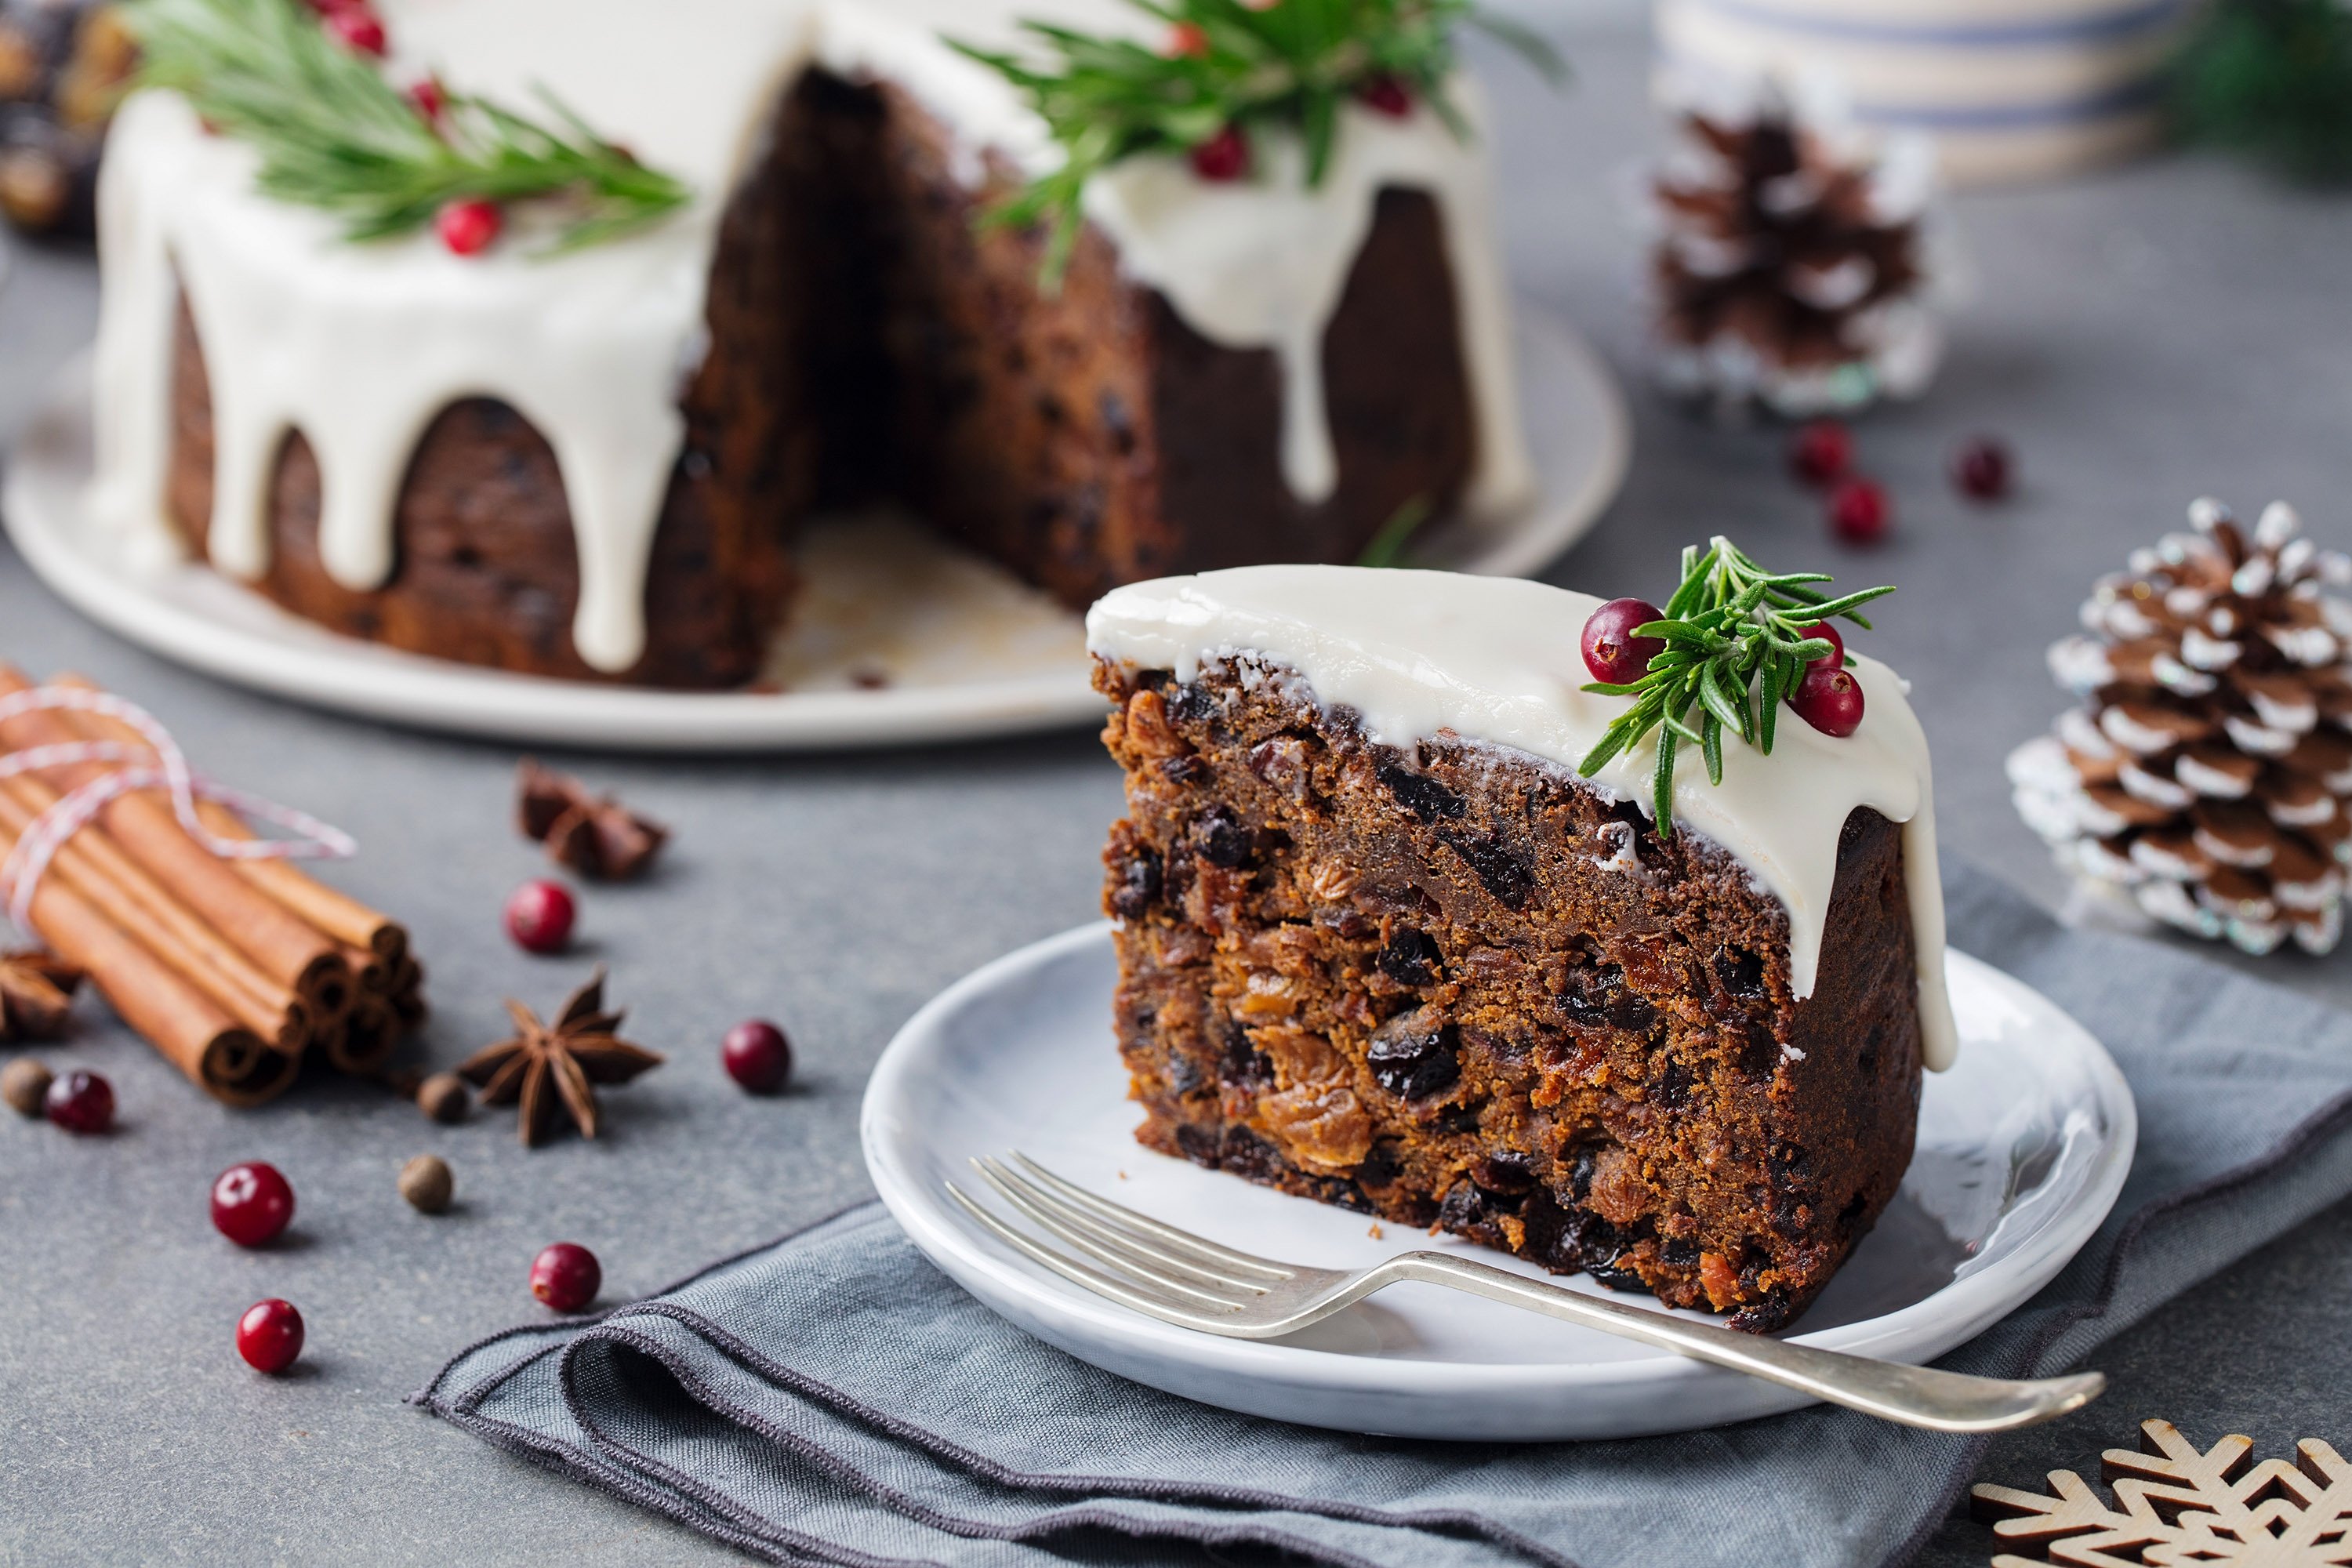 Served warm or cold, Christmas pudding is a traditional dish for the British and Irish. (Shutterstock Photo)